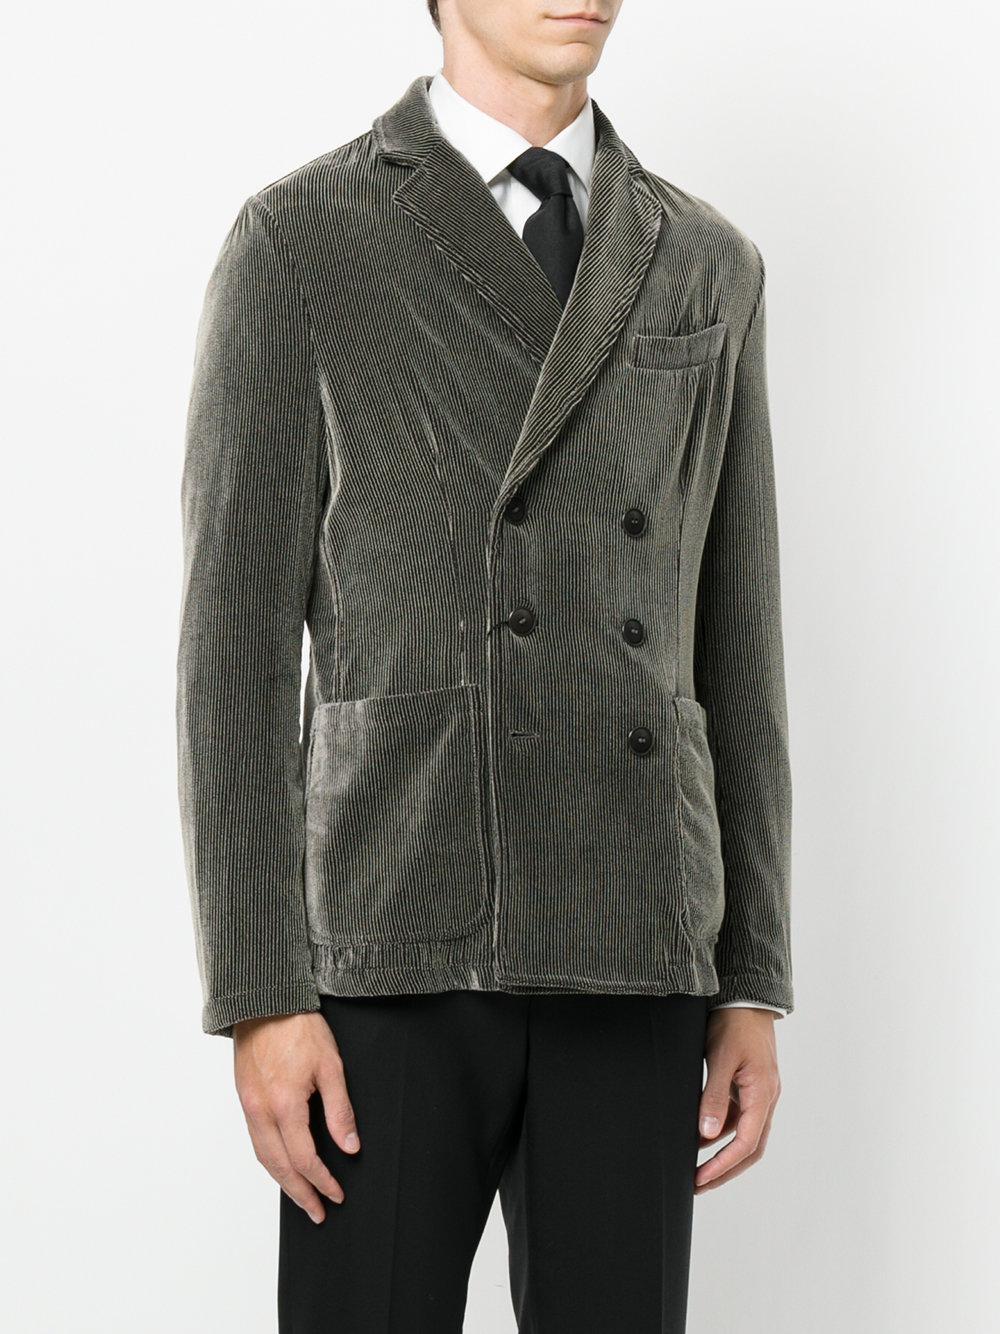 Giorgio Armani Double Breasted Corduroy Jacket in Green for Men - Lyst